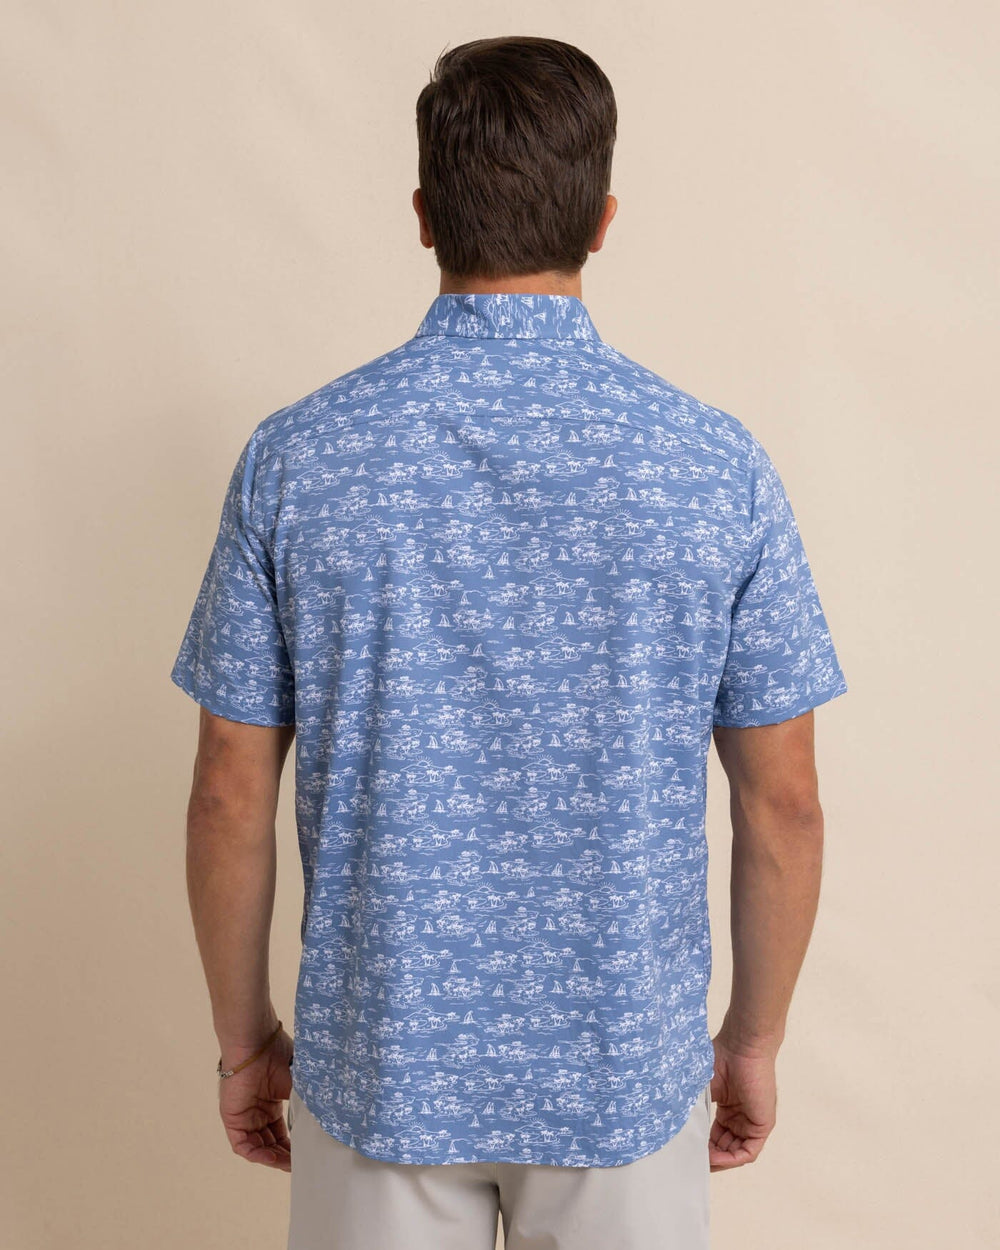 The back view of the Southern Tide brrr Intercoastal Sunset Beach Short Sleeve SportShirt by Southern Tide - Coronet Blue